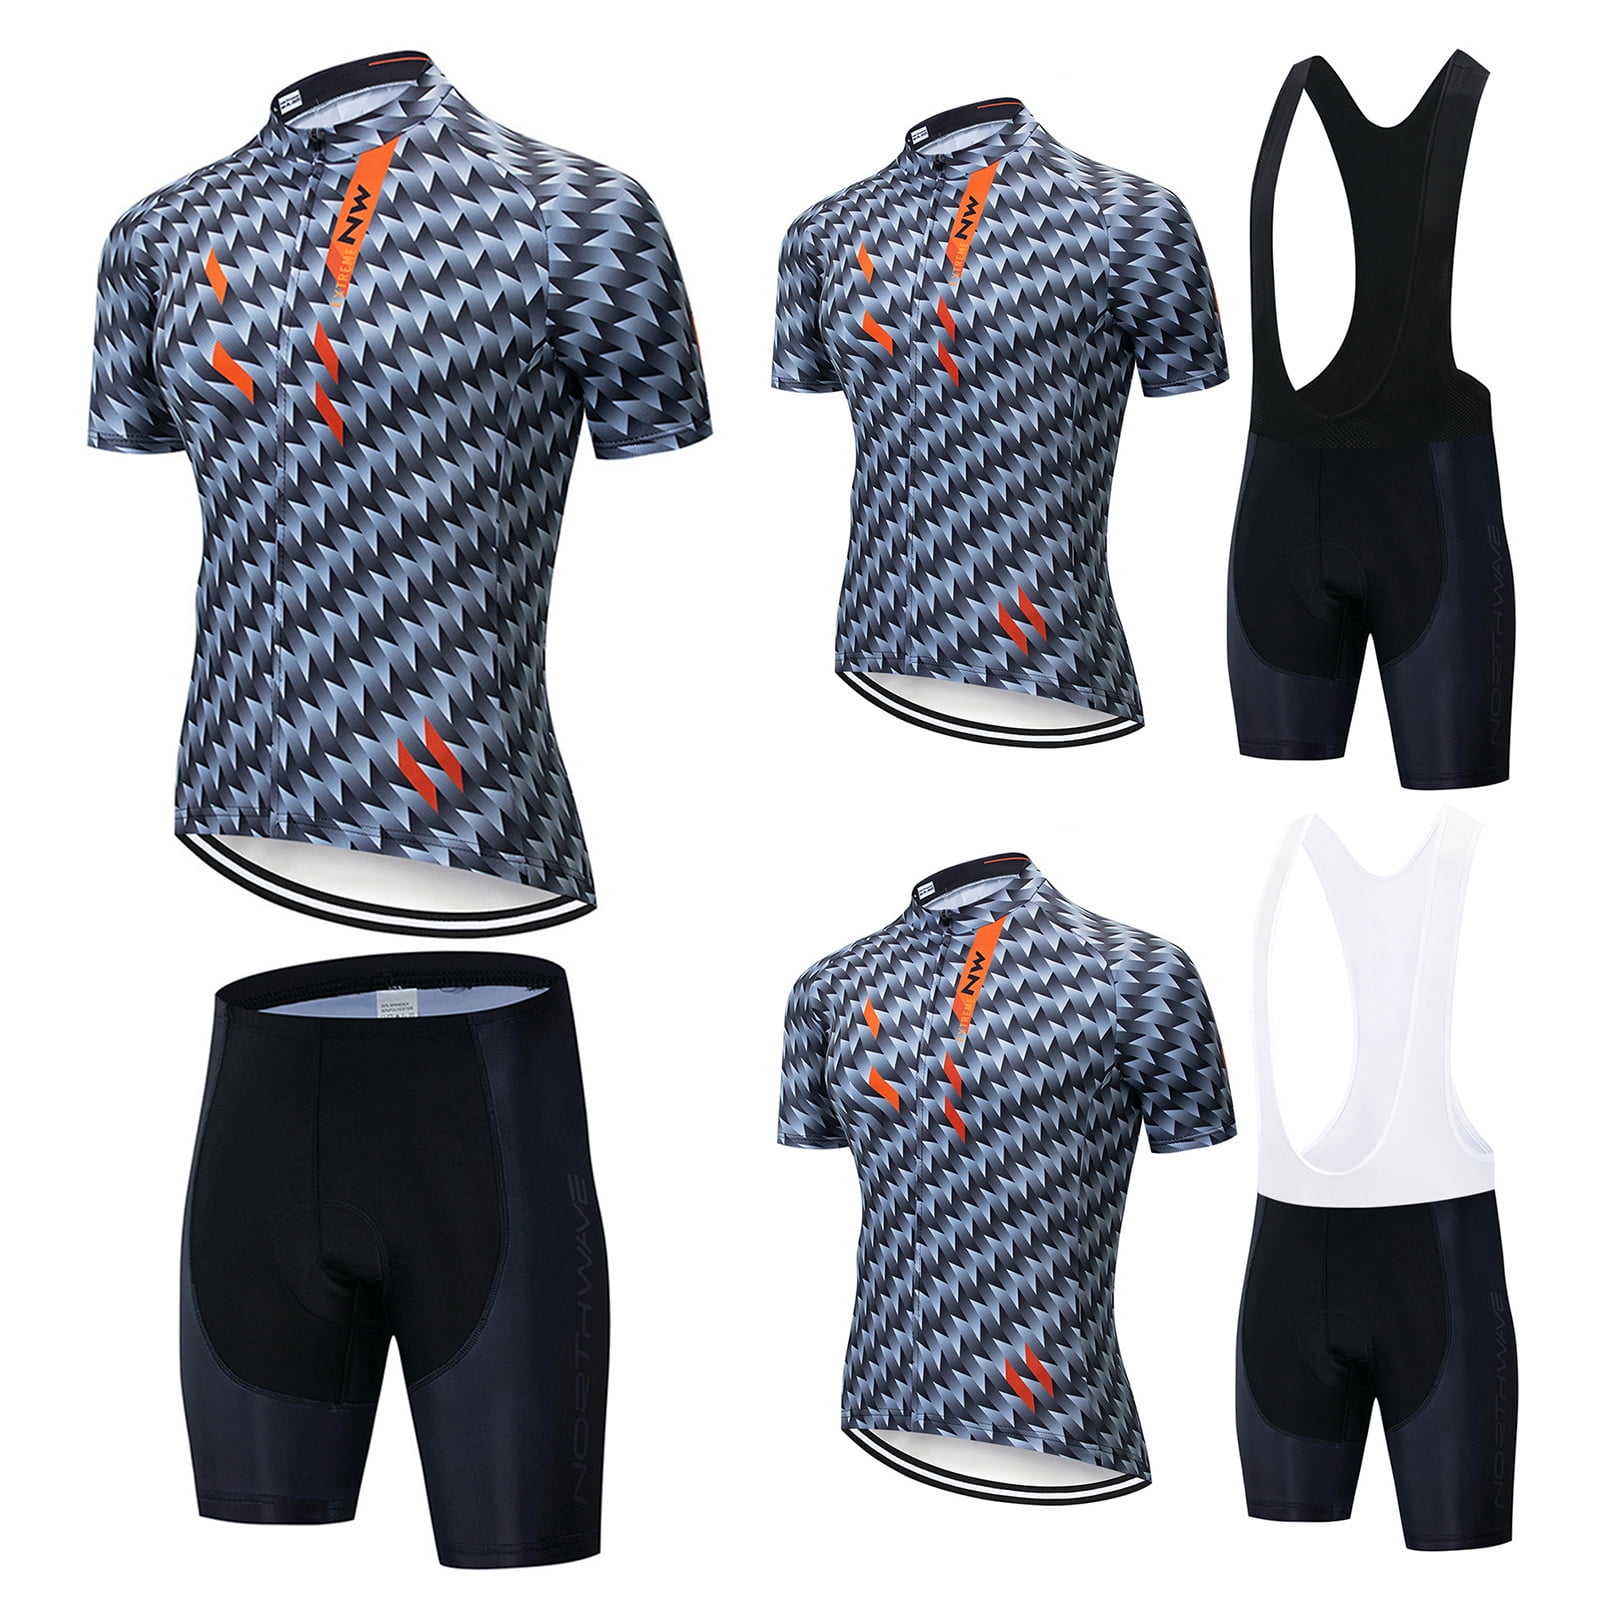 Shipley Stoffig dodelijk harmtty Bicycle Short Sleeve Set Breathable Sweat Absorption Flax Cycling  Jerseys Road Bicycle Shirts Kit for Men,Blue＋Floral Print - Walmart.com